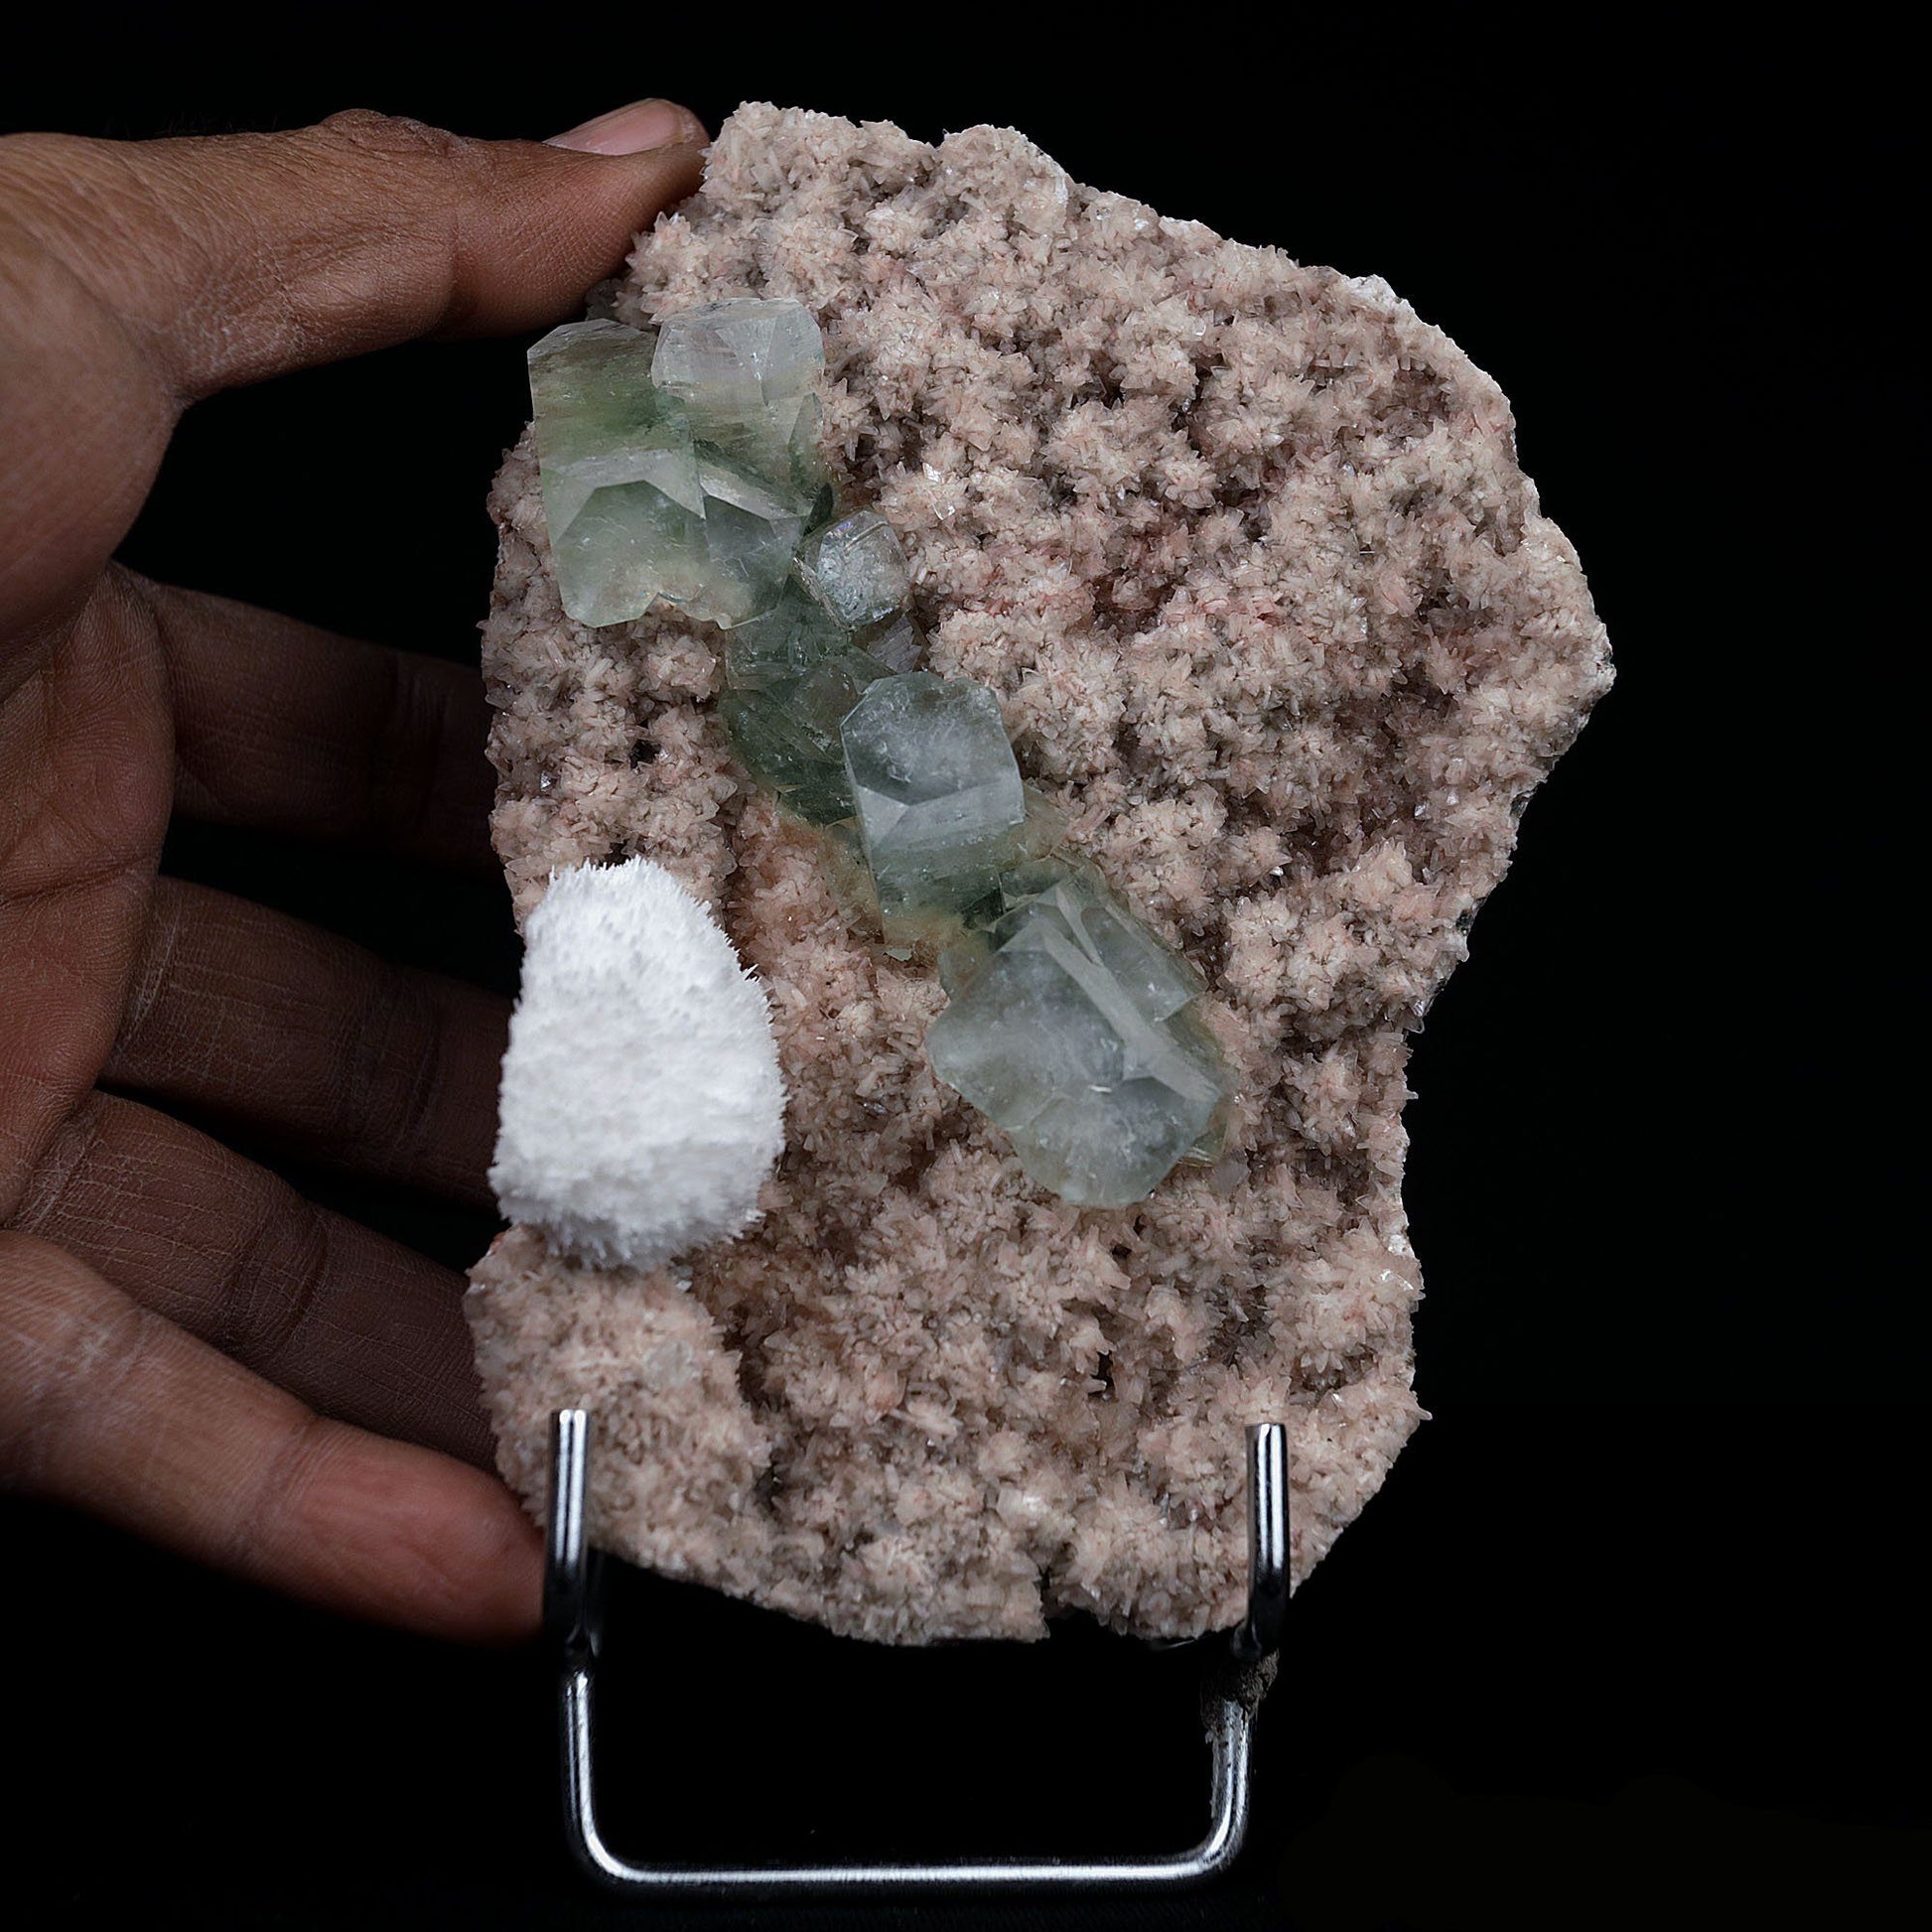 Green Apophyllite with Mordenite on Heulandite Natural Mineral Specime…  https://www.superbminerals.us/products/green-apophyllite-with-mordenite-on-heulandite-natural-mineral-specimen-b-4097  Features:An extremely stylish piece highlighting a lattice thickly covered with scaled-down, beige heulandite precious crystals several shiny, bigger light-beige Heulandite crystals on the framework